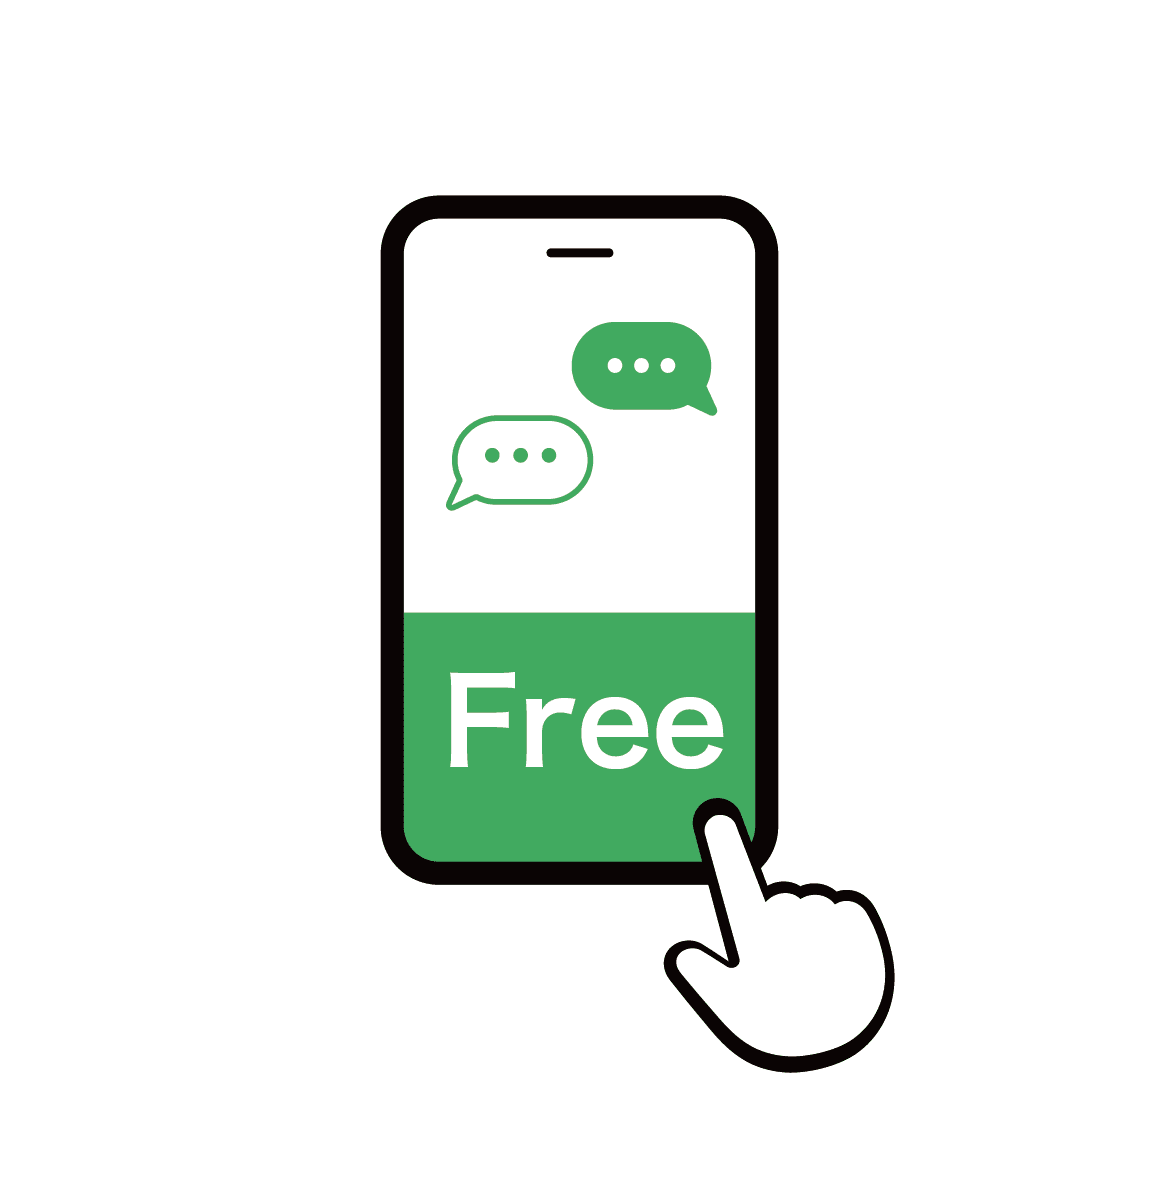 Chatbot (Messaging API) Service provider benefits Rich menus are available free of charge